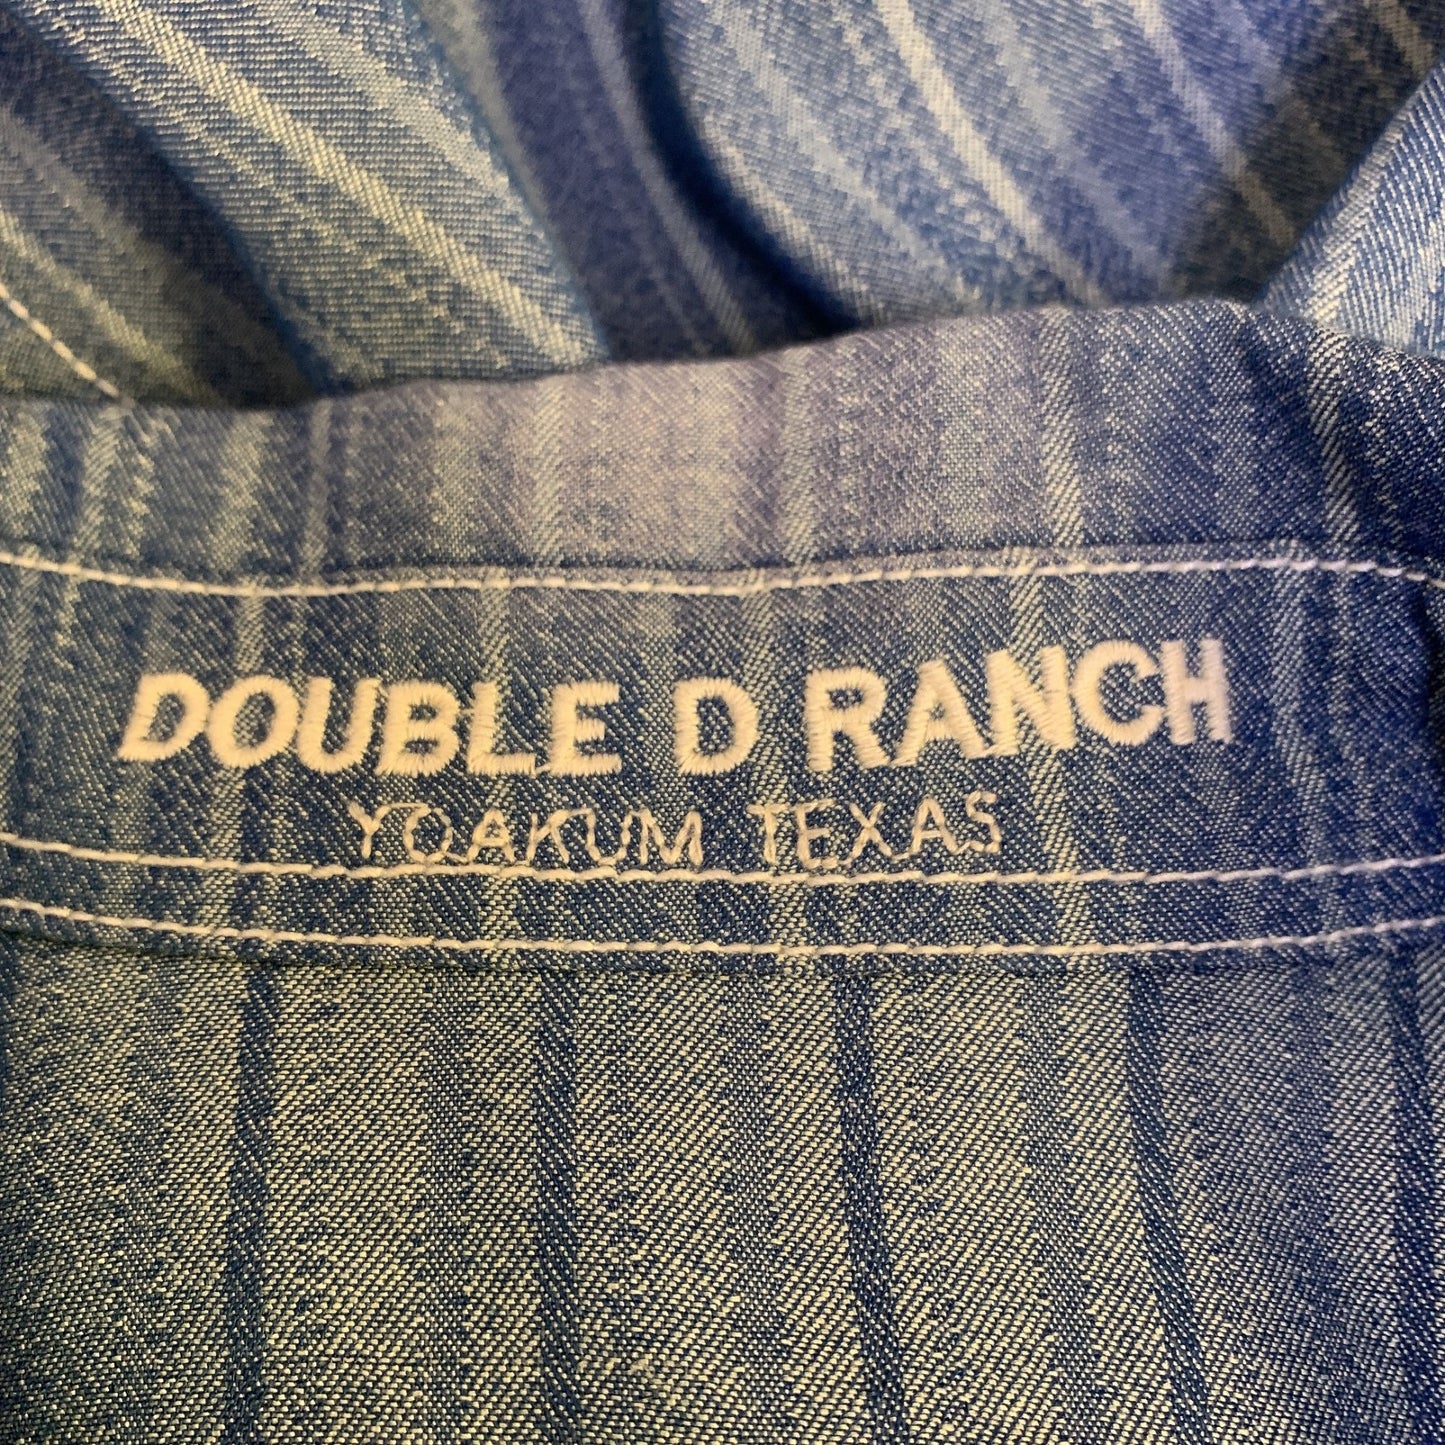 Double D Ranch NWT Striped Chambray Dress Size Medium